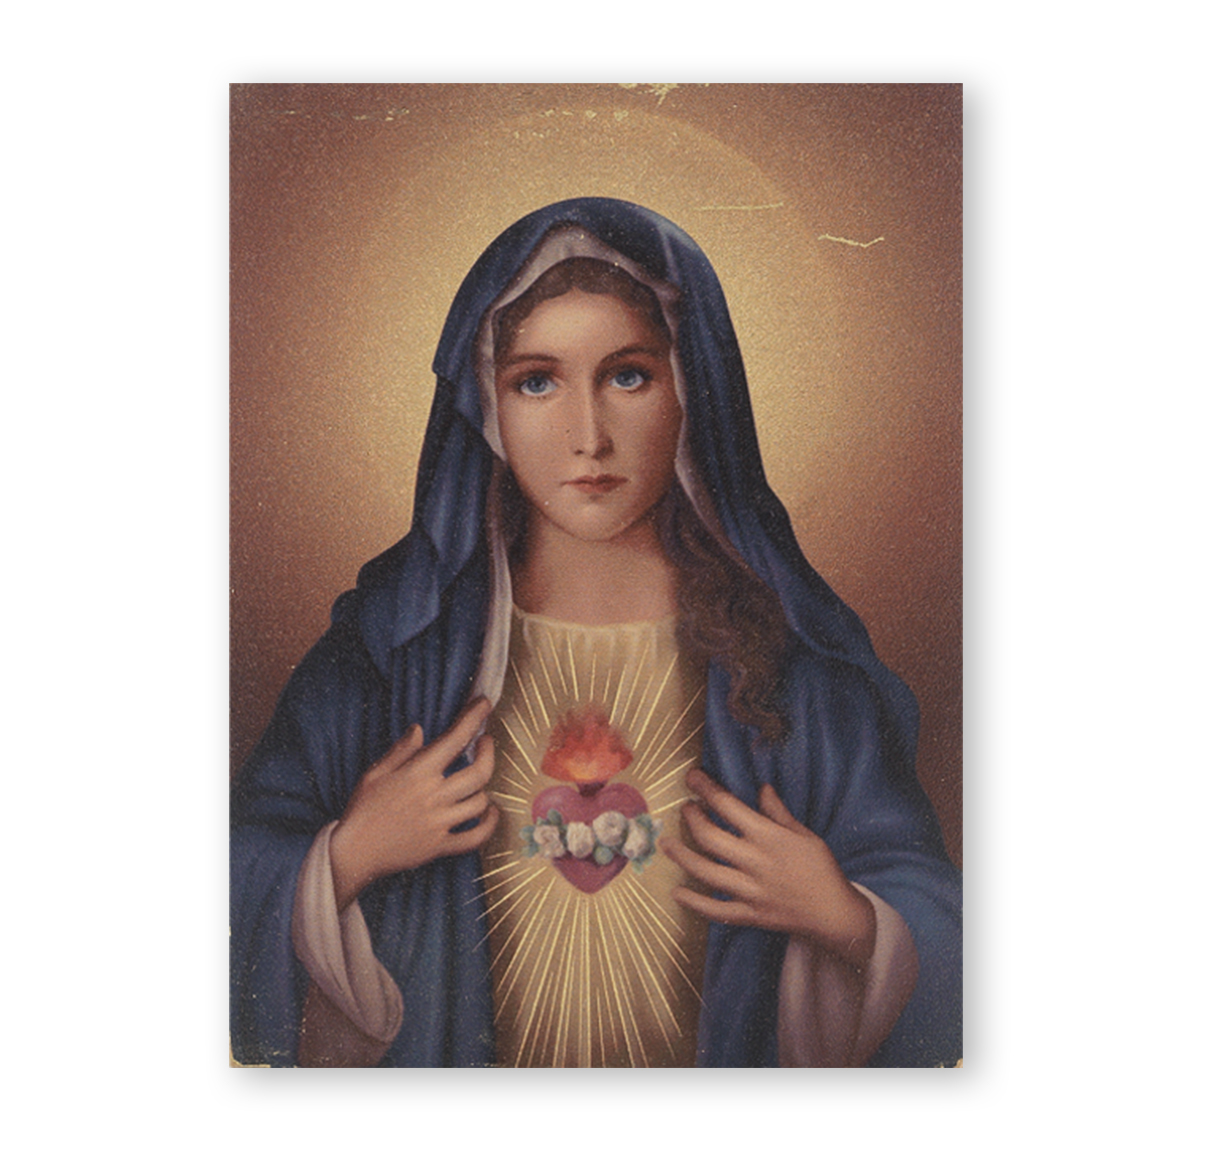 Plaque Immaculate Heart of Mary 3 x 4 inch Textured Wood